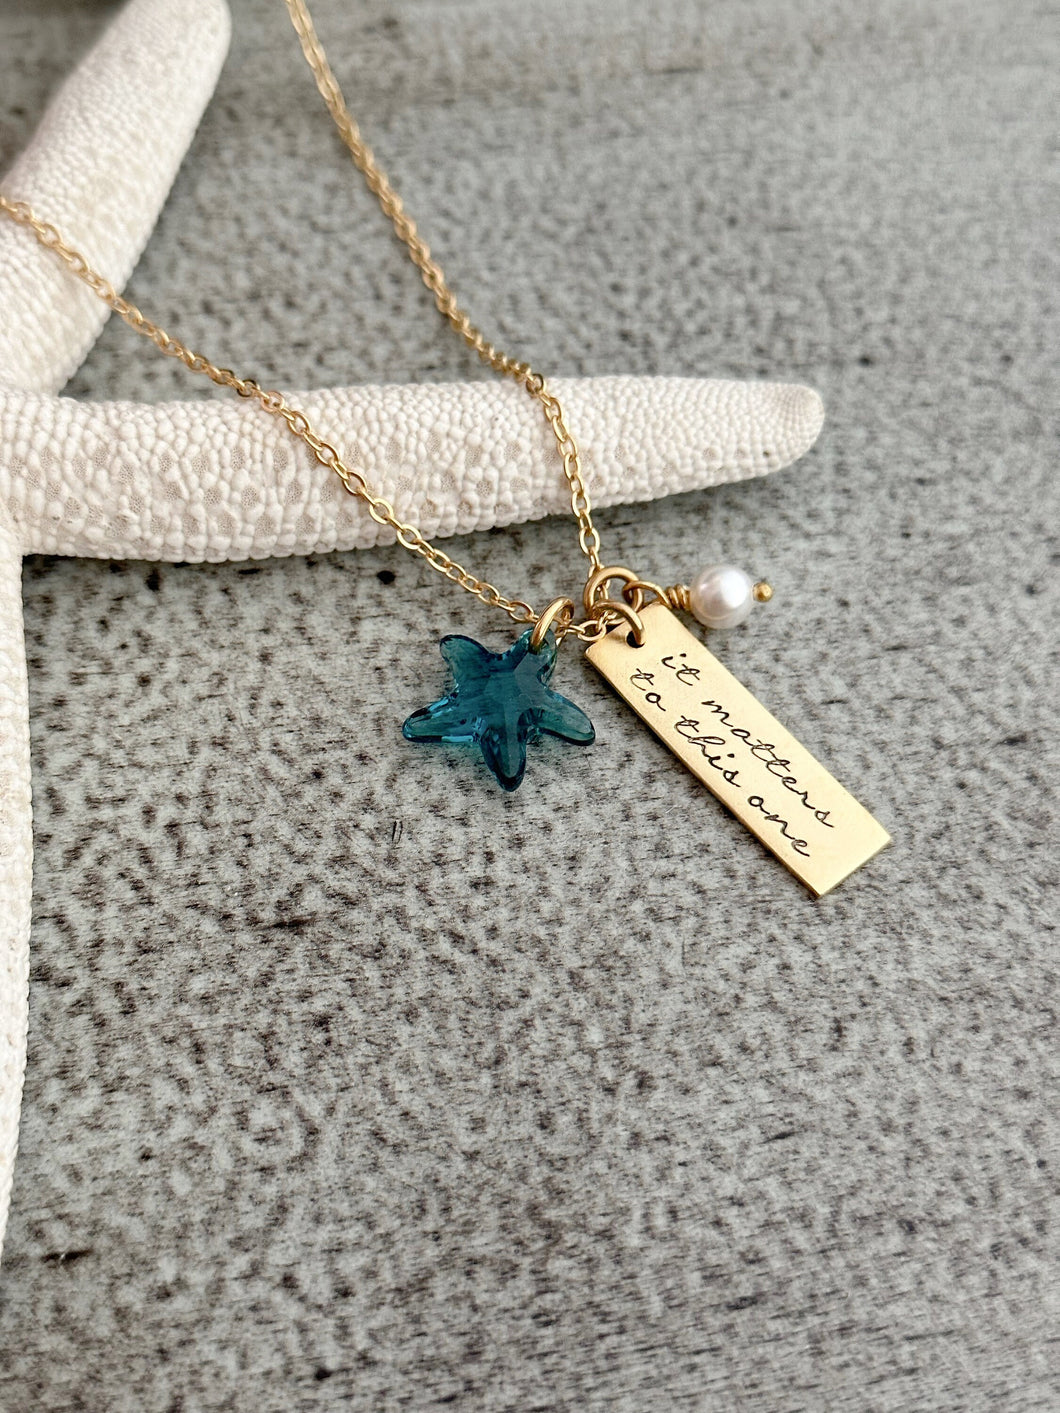 Starfish necklace - it matters to this one quote necklace - Teacher gift idea from student gold or silver pewter with crystal starfish